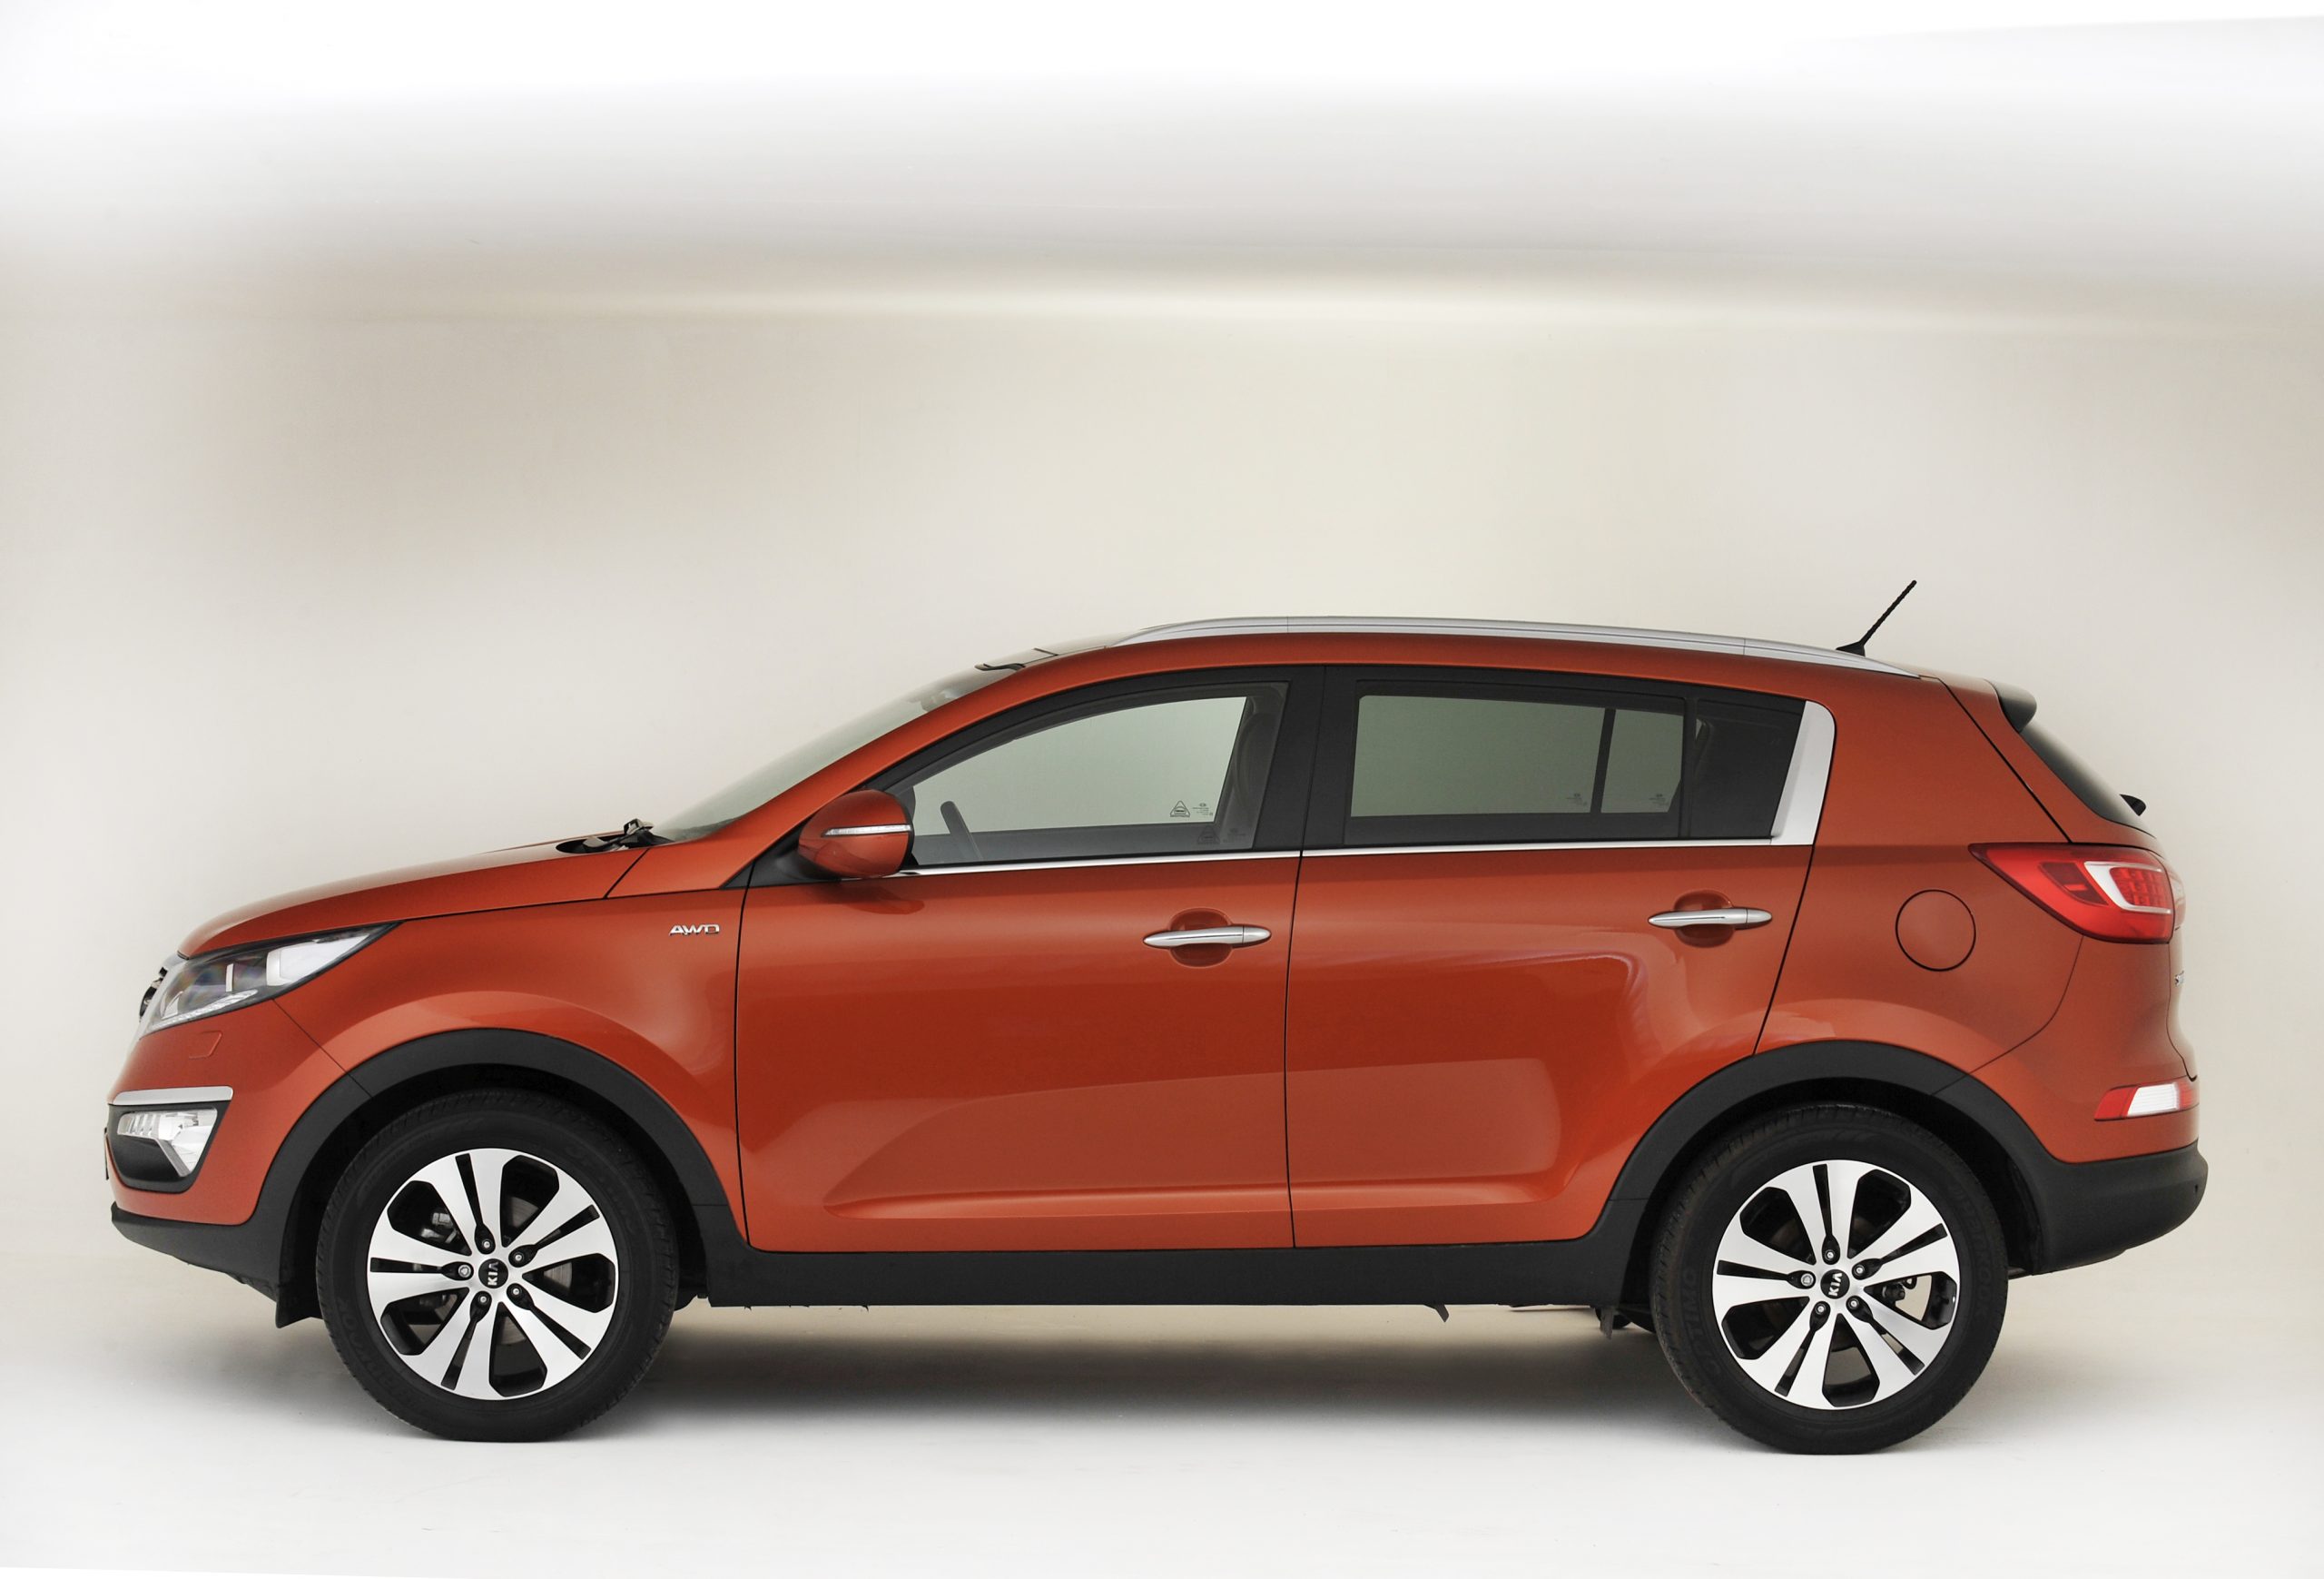 An orange 2013 Kia Sportage with a white background, it is one model year that should be avoided.